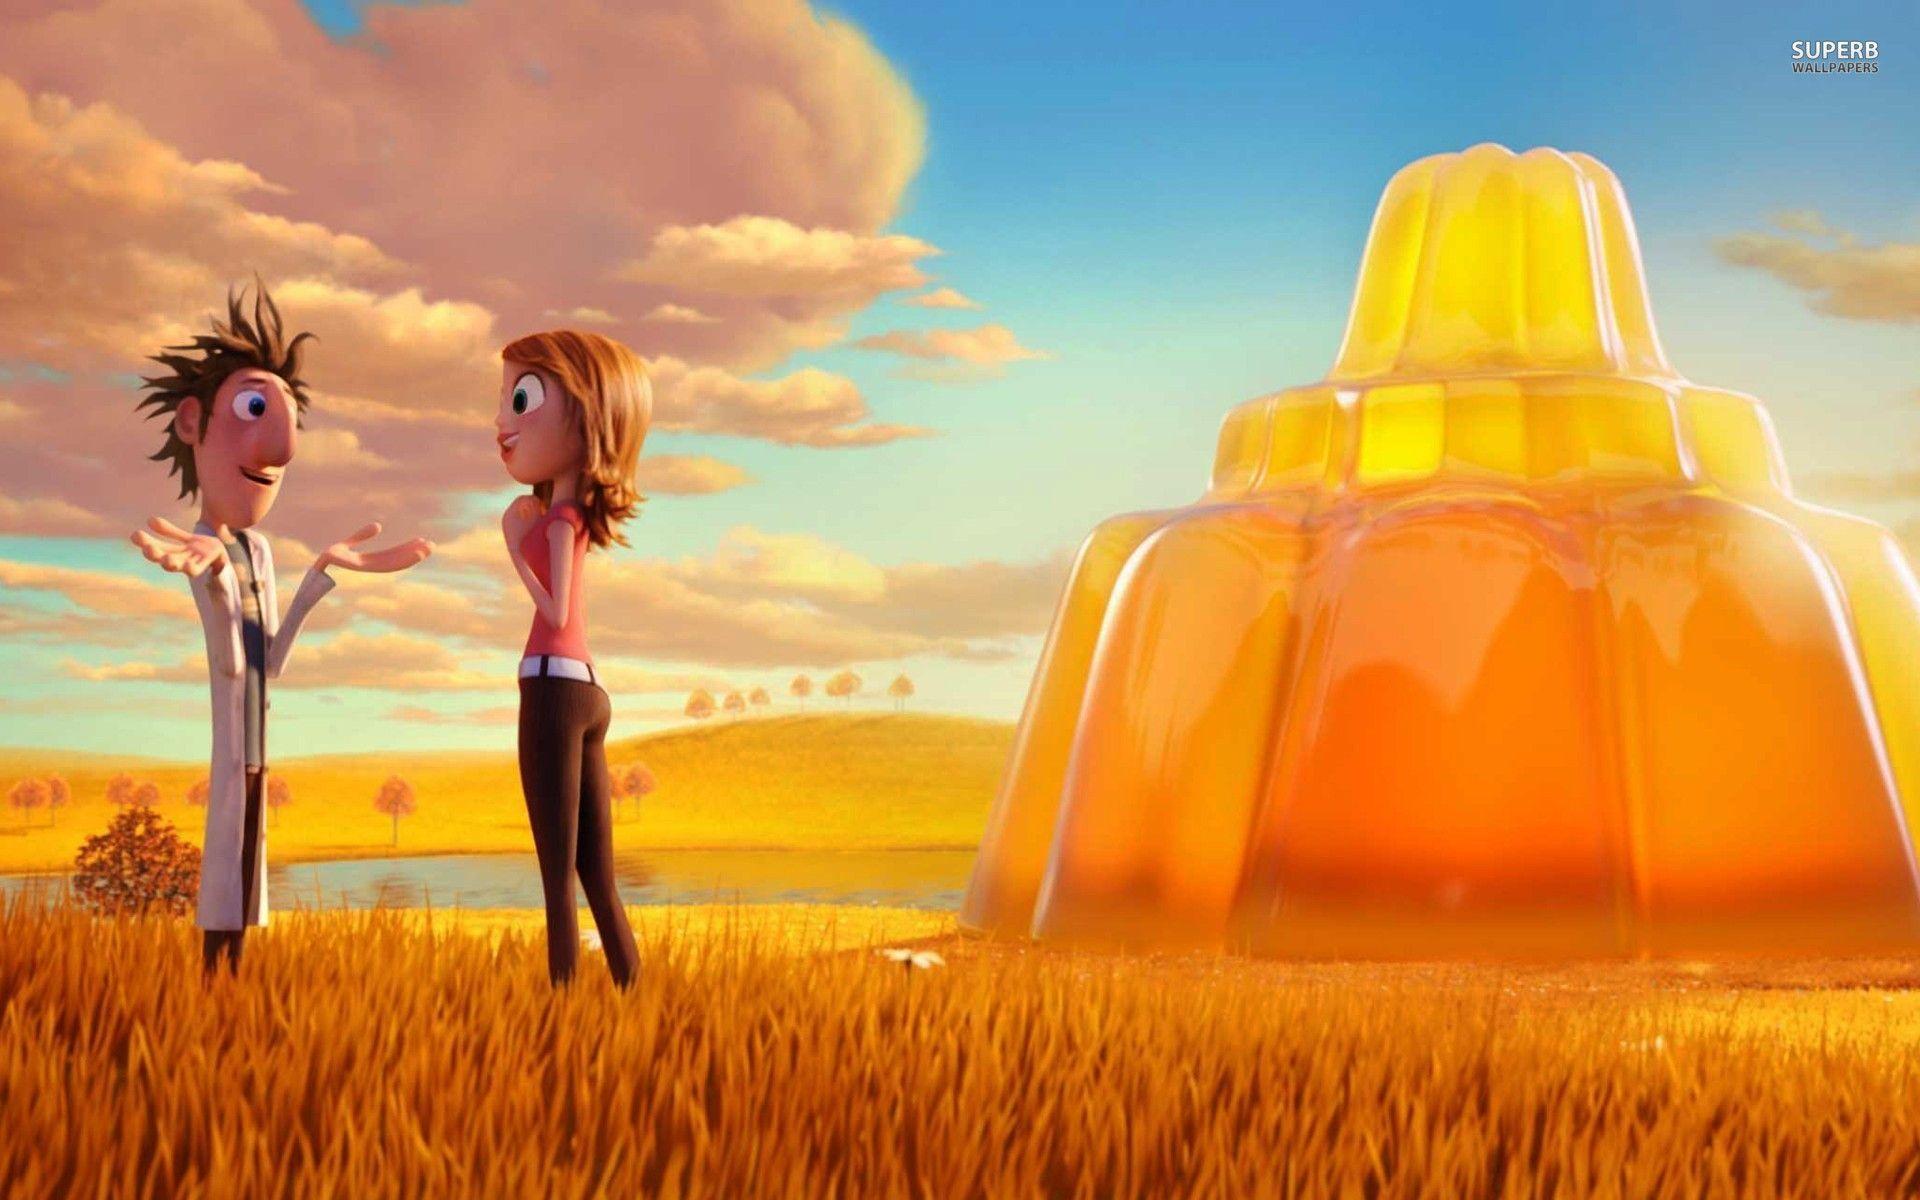 Wallpaper Blink with a Chance of Meatballs Wallpaper HD 10